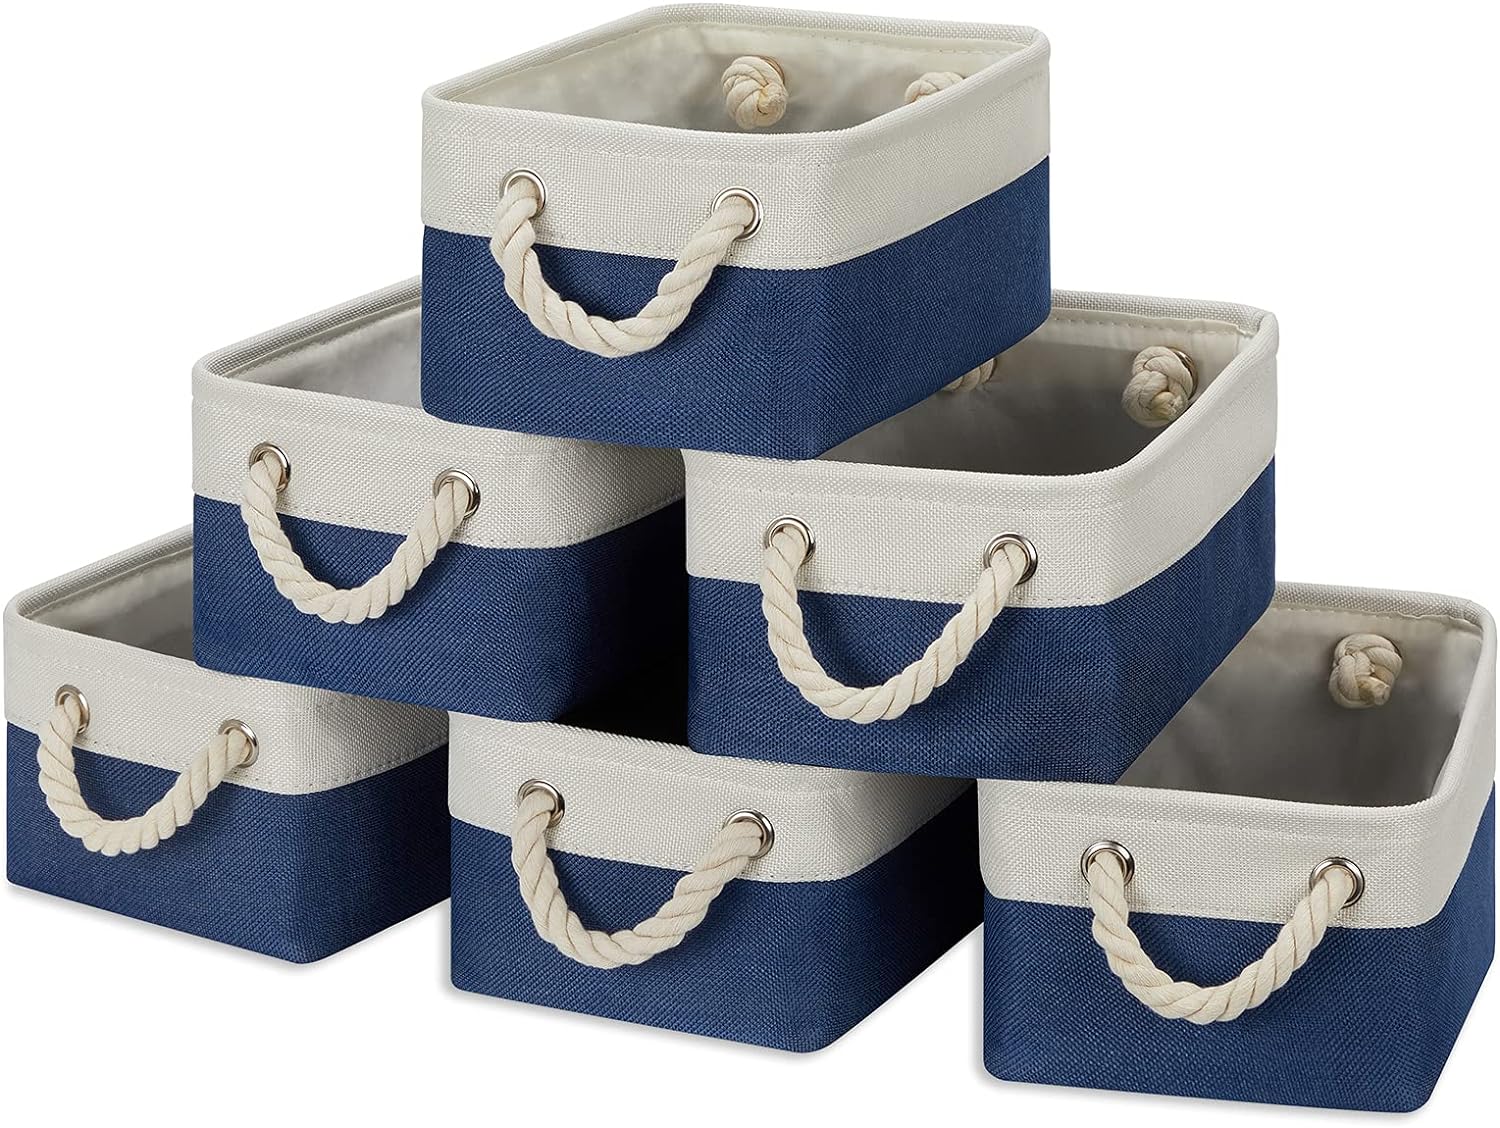 Temary Small Storage Baskets for Shelves, 6 Pcs Empty Gift Baskets for Organizing Clothes, Toys, Books, Fabric Storage Bins with Rope Handles (White&Blue,11.8 L x 7.9 W x 5.3 H inches)